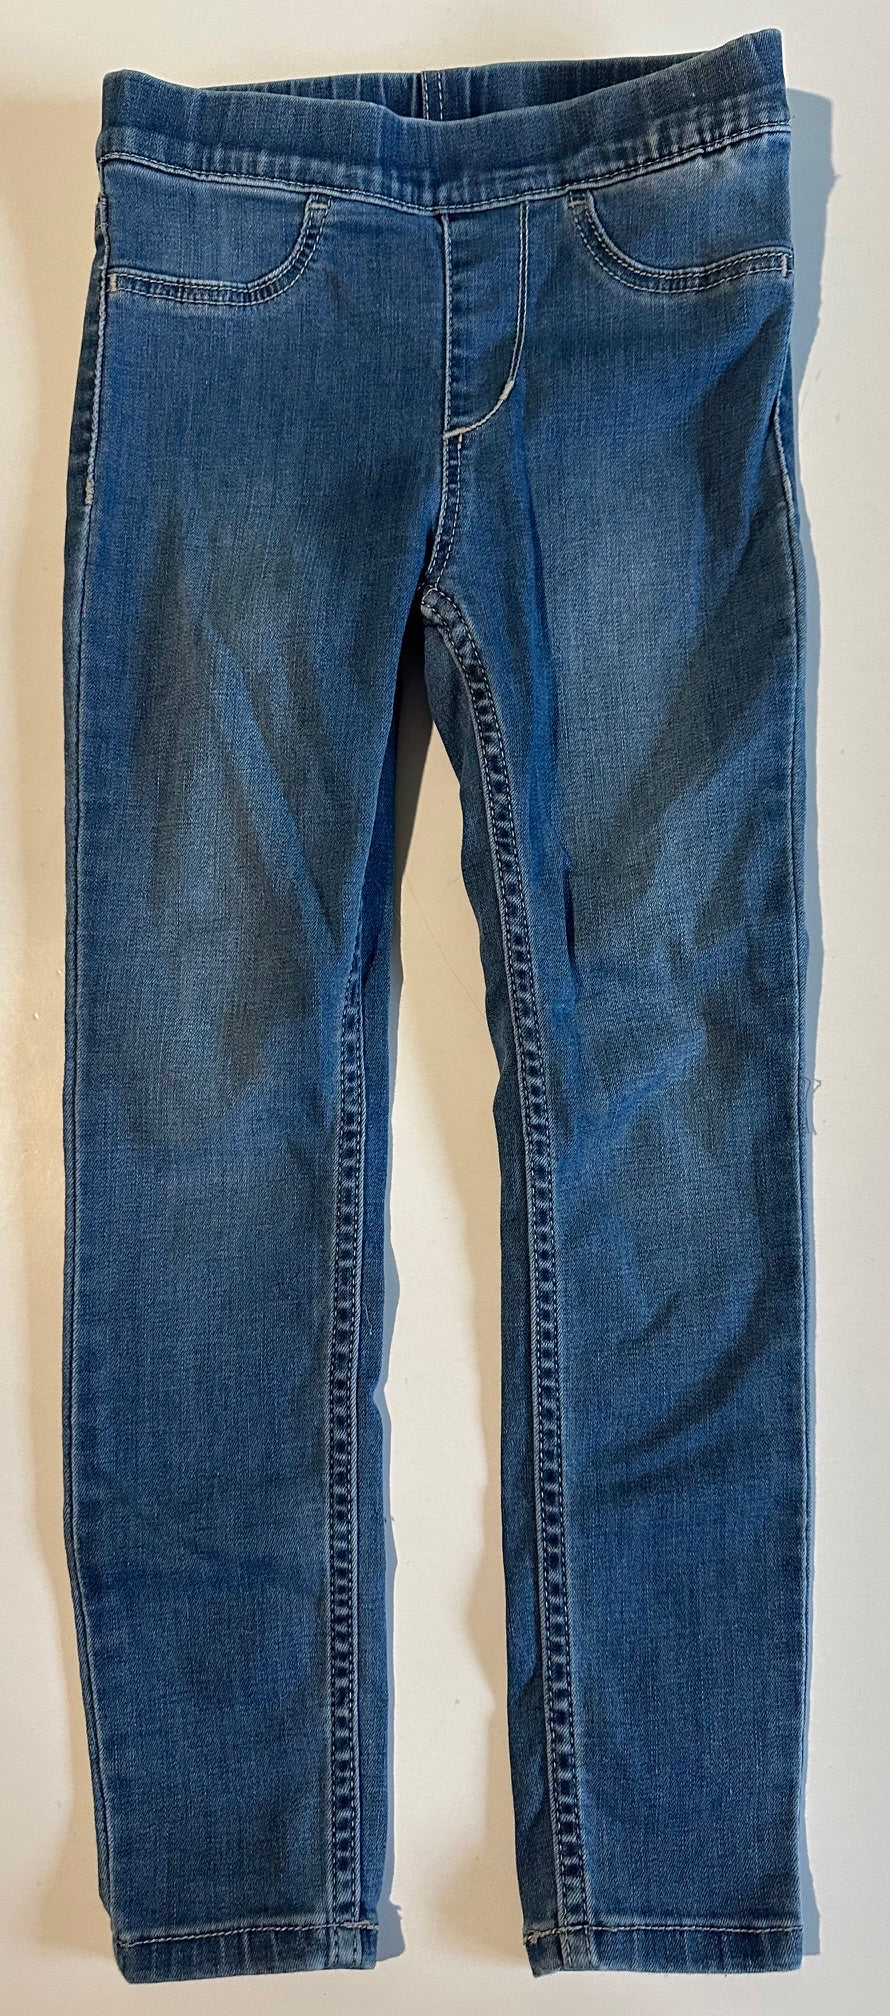 H&M, Jeggings - Size 4-5